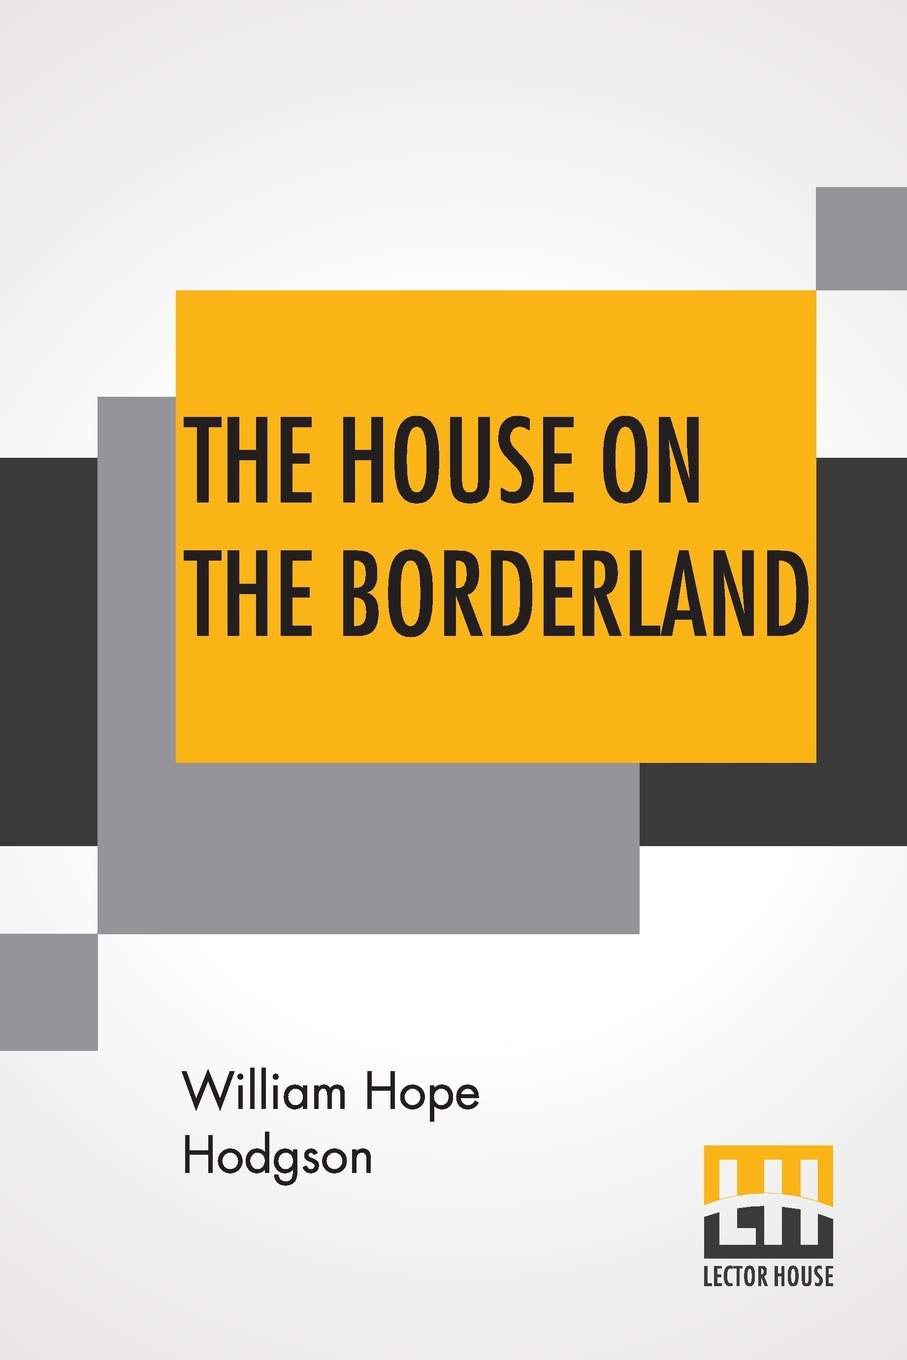 The House On The Borderland. From The Manuscript Discovered In 1877 By Messrs. Tonnison And Berreggnog In The Ruins That Lie To The South Of The Village Of Kraighten, In The West Of Ireland. Set Out Here, With Notes.